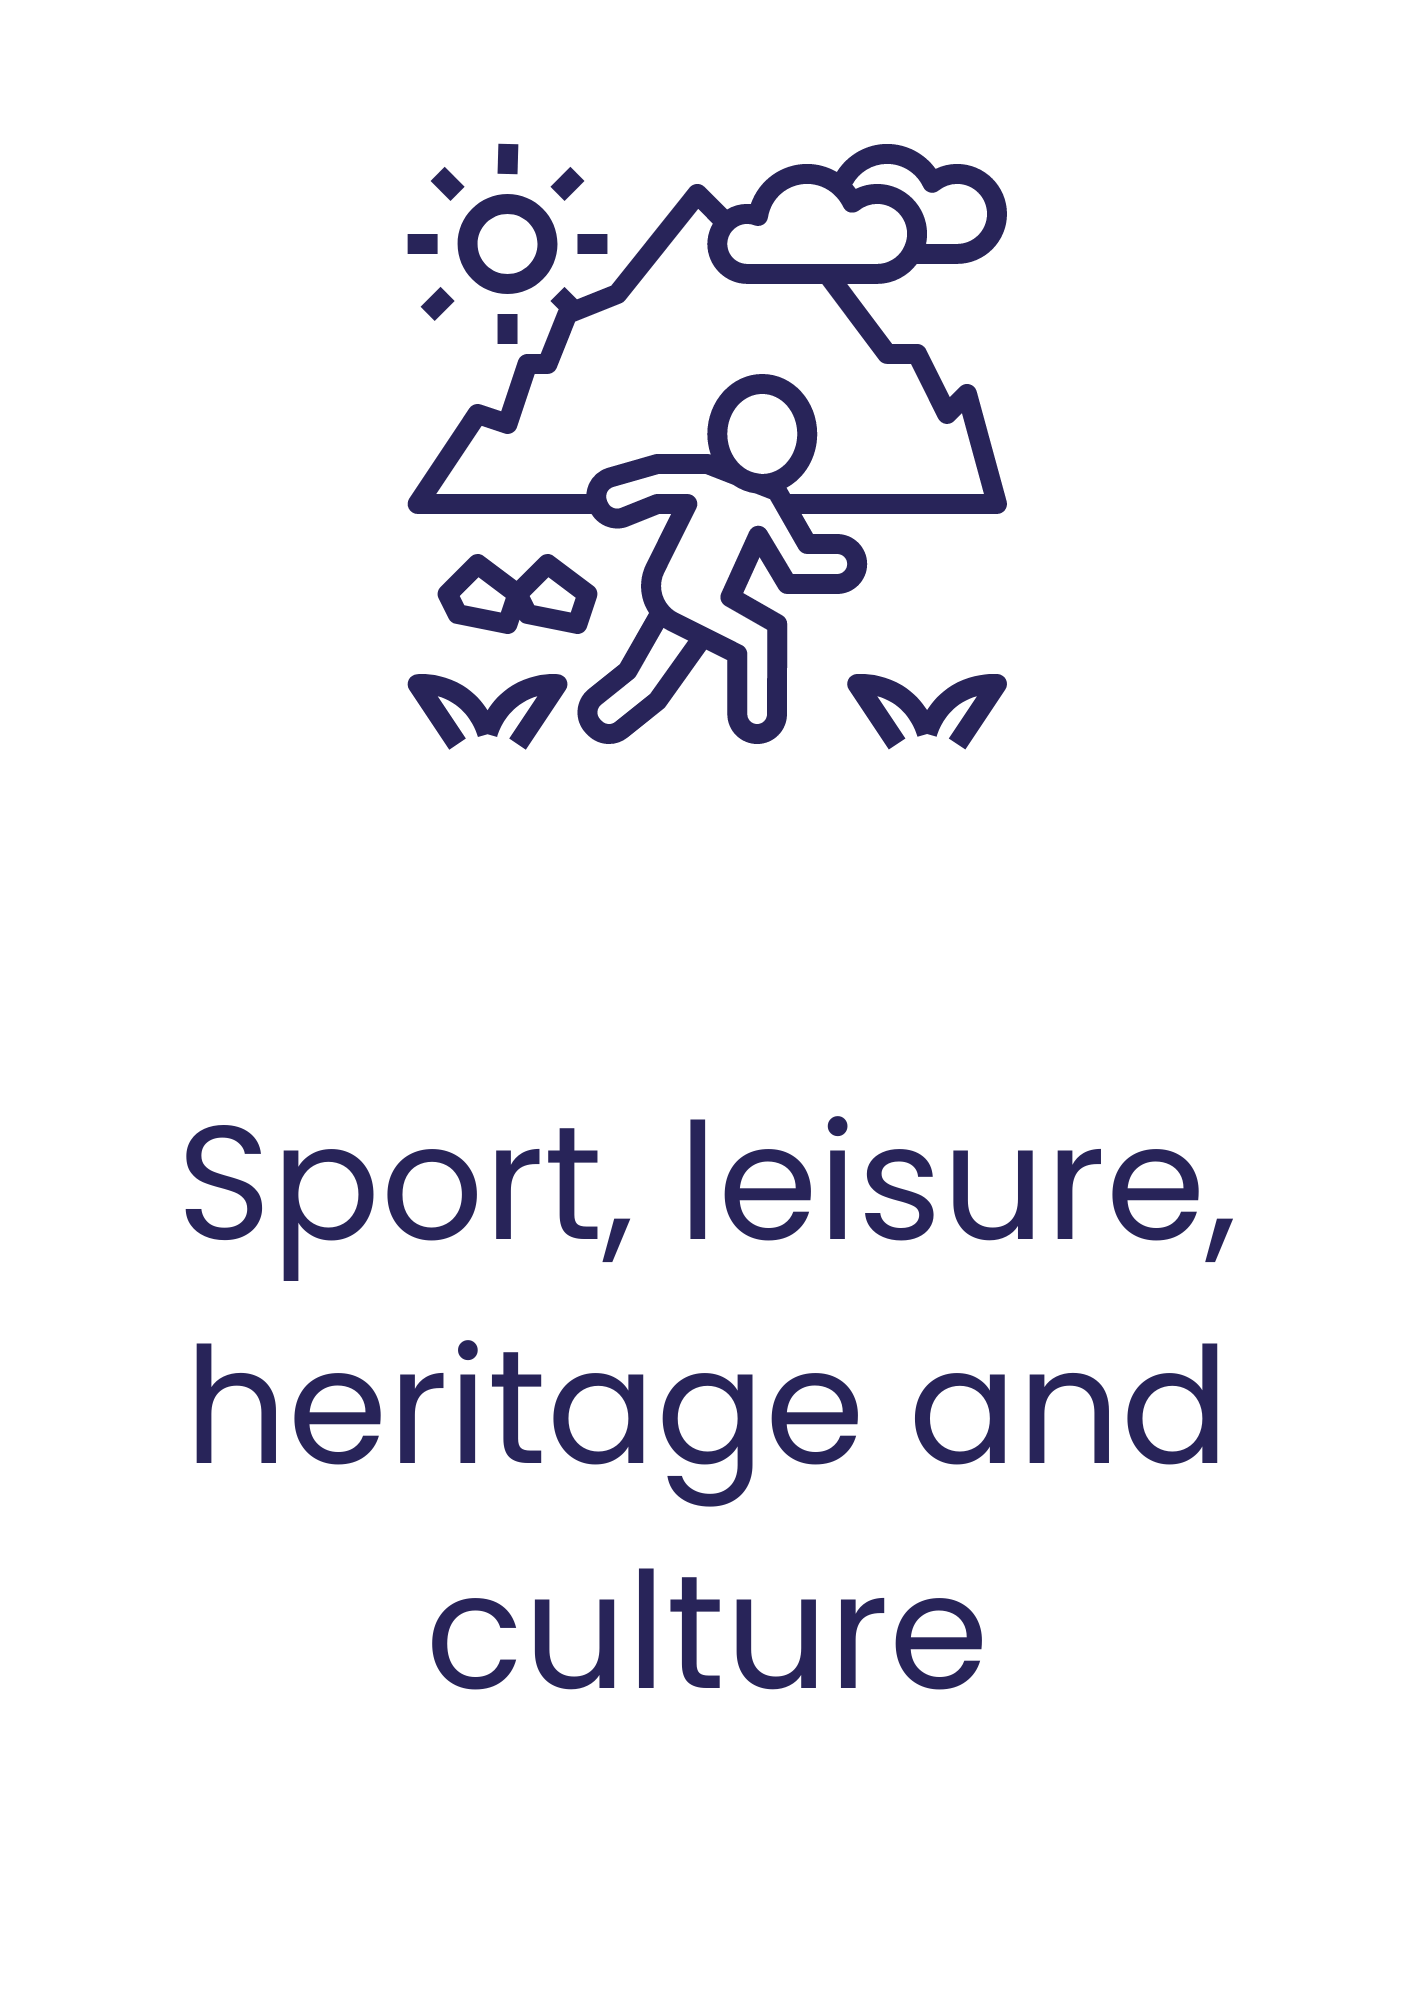 Sports, leisure, heritage and culture funding